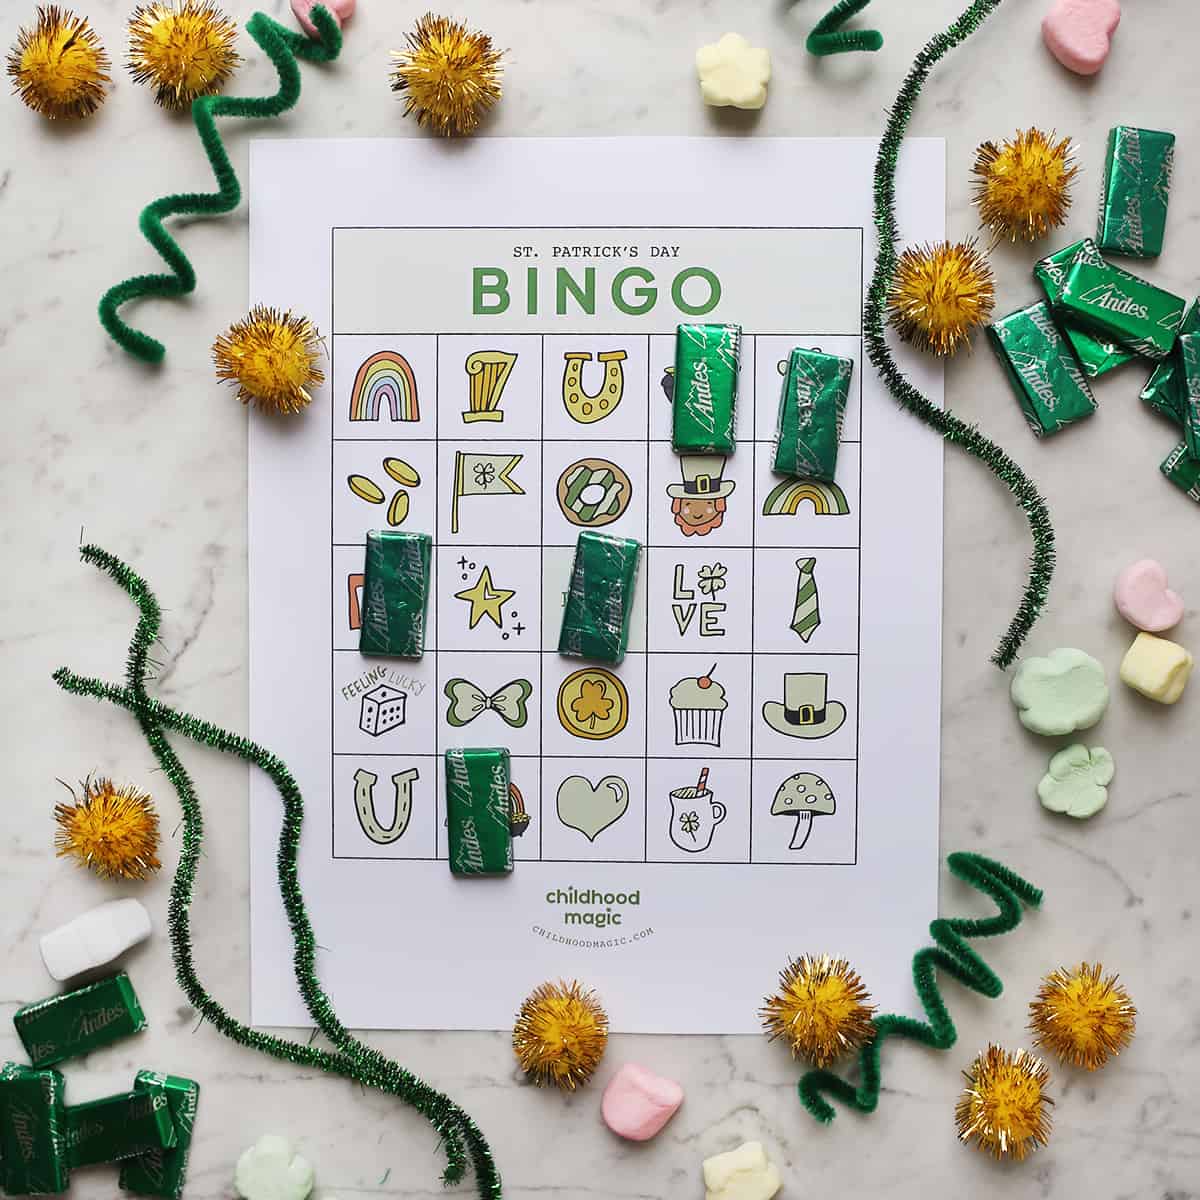 St. Patrick's Day bingo card on counter with candy for tokens. 